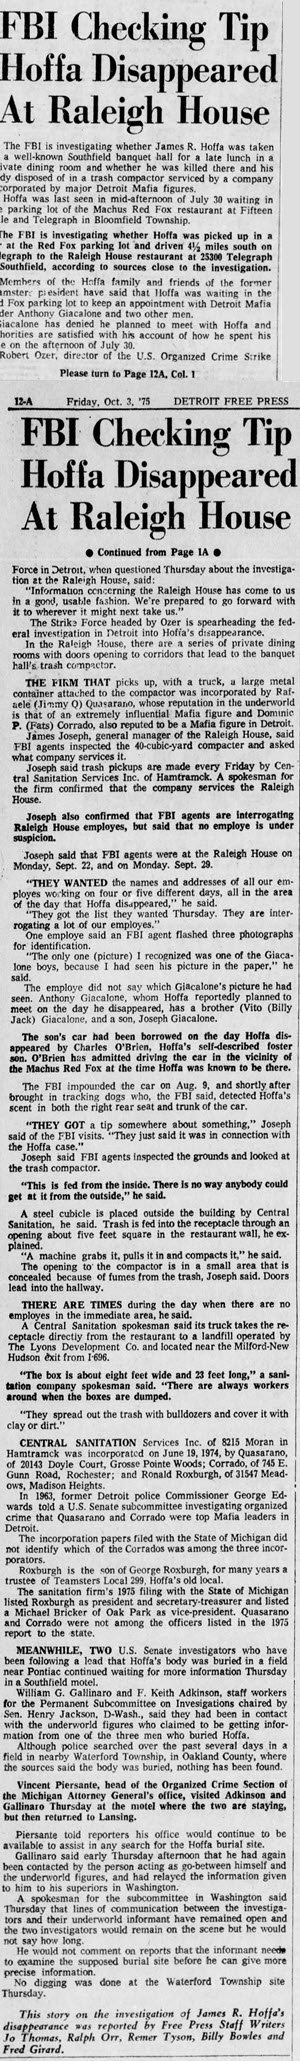 The Raleigh House - October 1975 Article On Hoffa Search